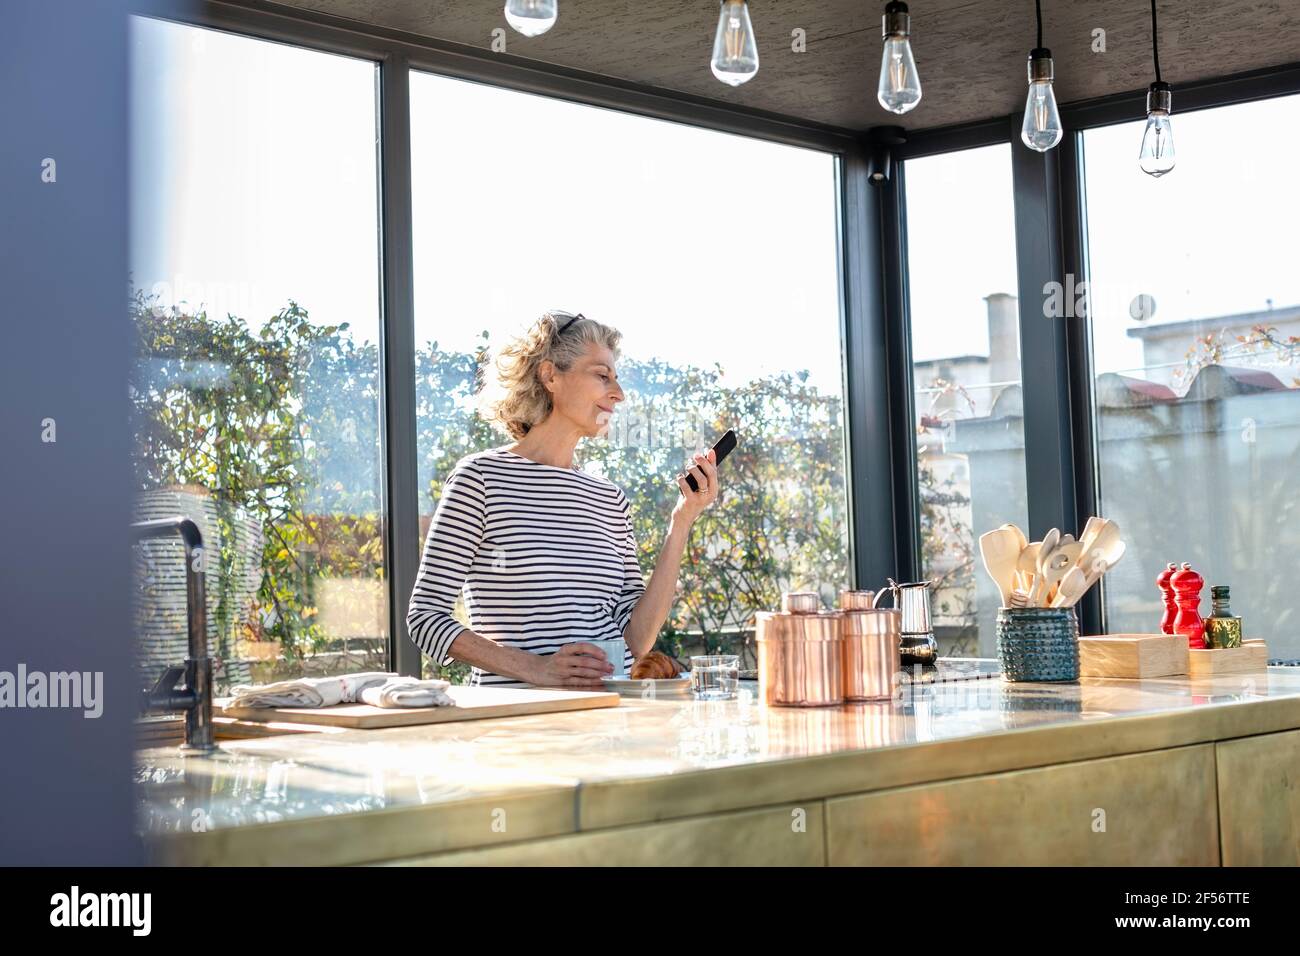 Woman using mobile phone while standing by kitchen island at home Stock Photo